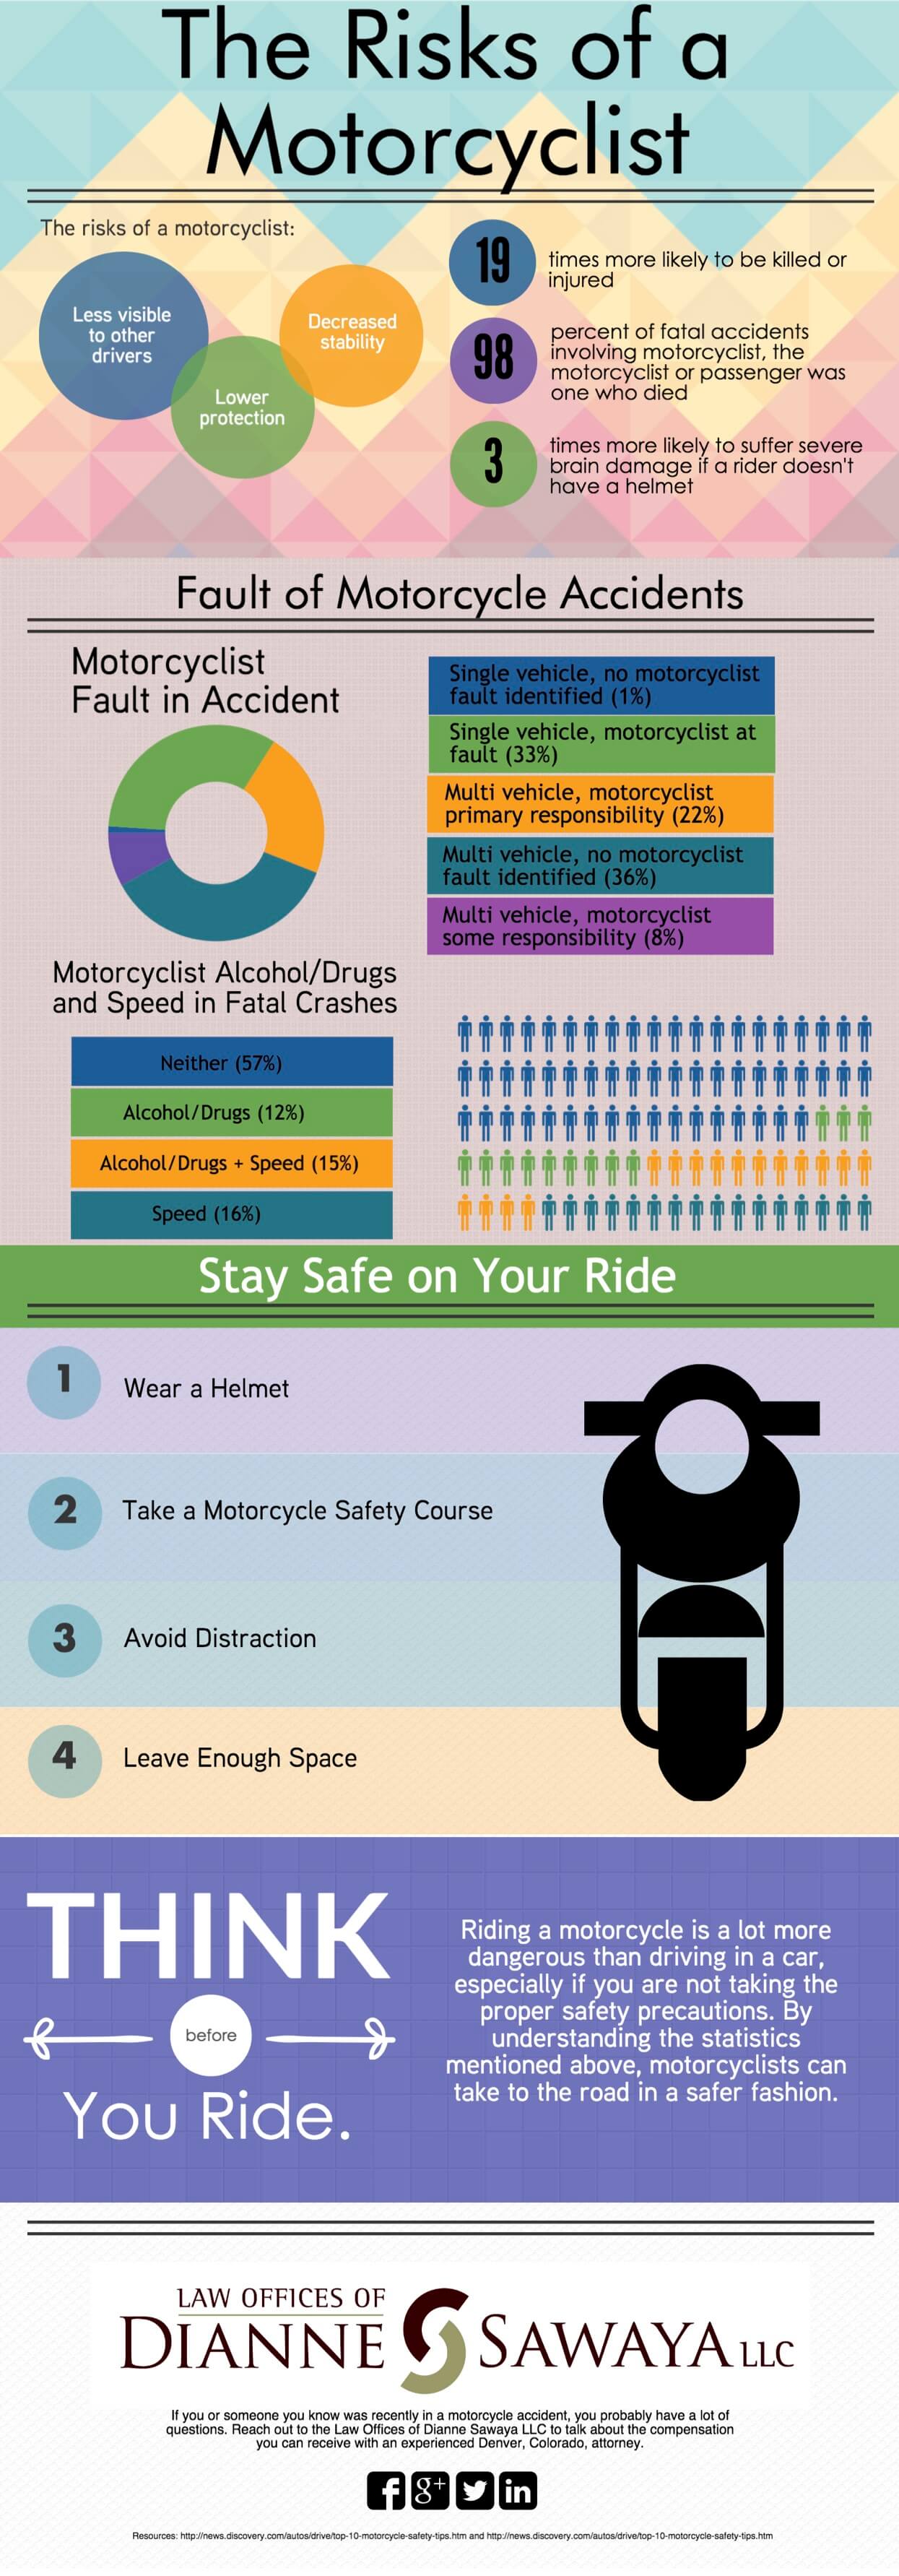 6 2015 The Risks of a Motorcyclist